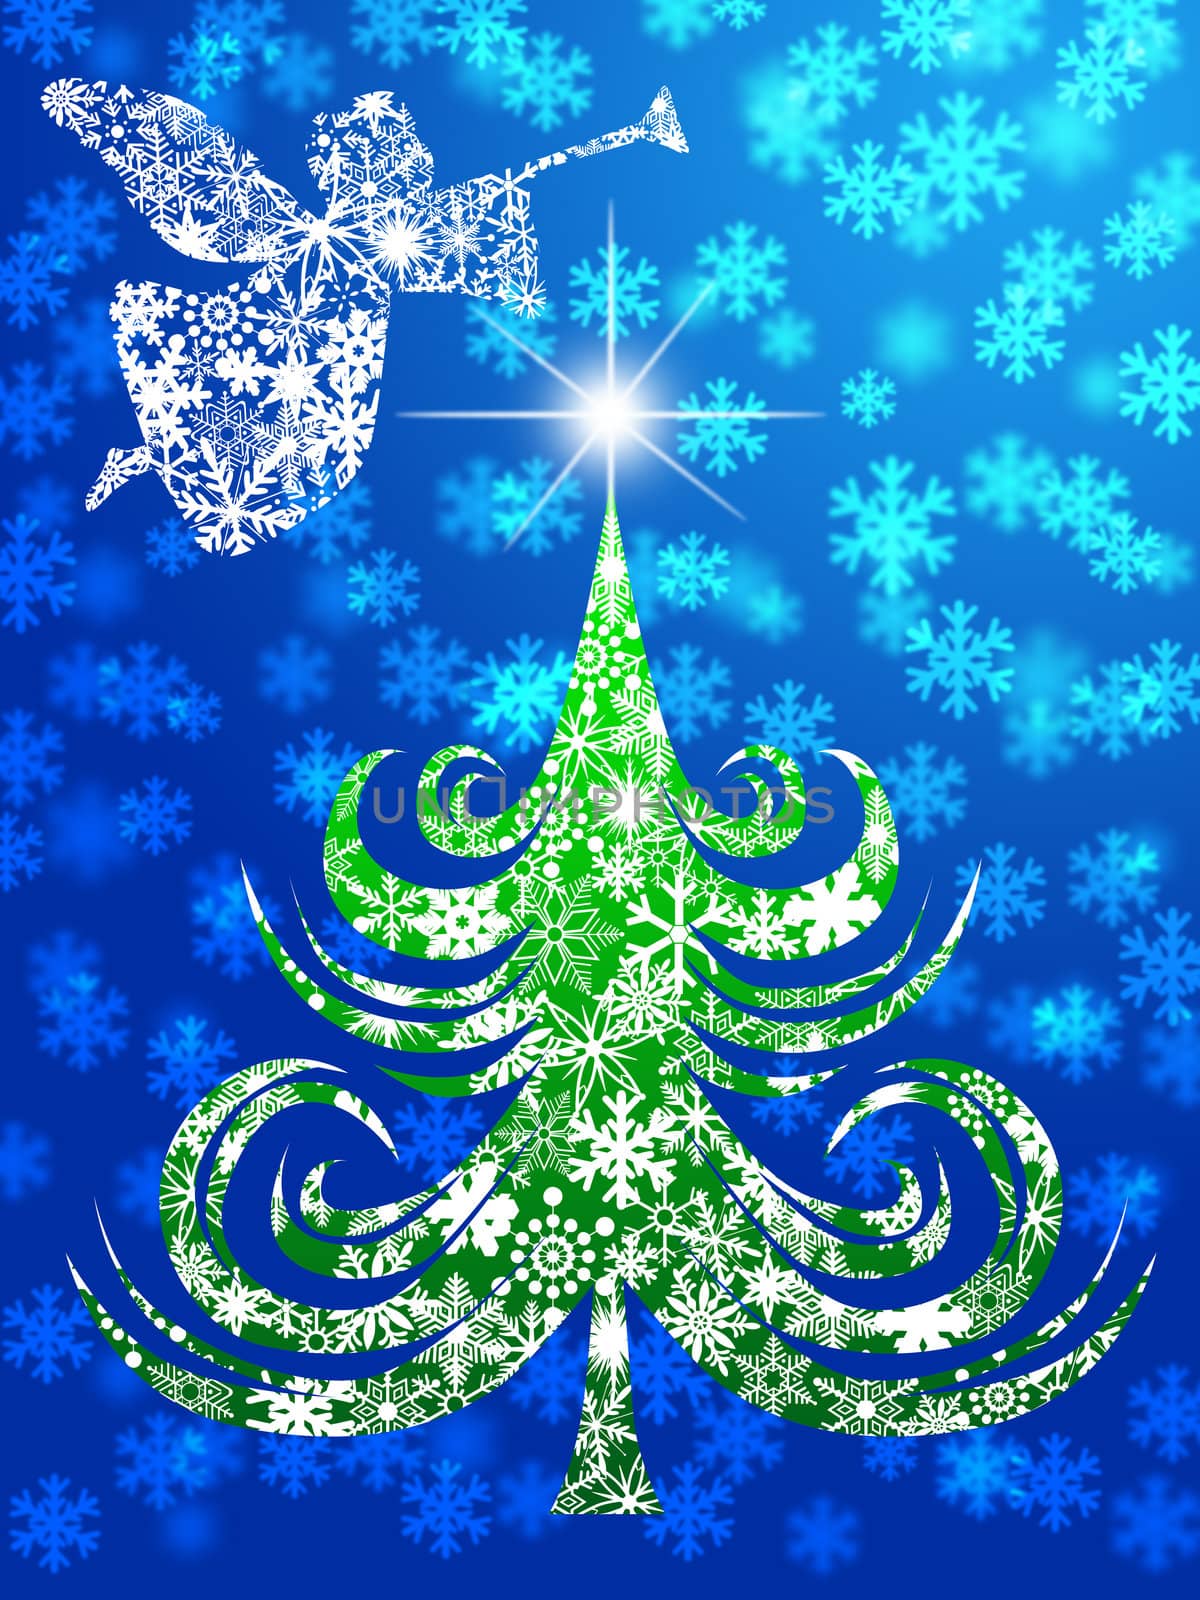 Snowflakes Angel with Trumpet Over Christmas Tree Illustration